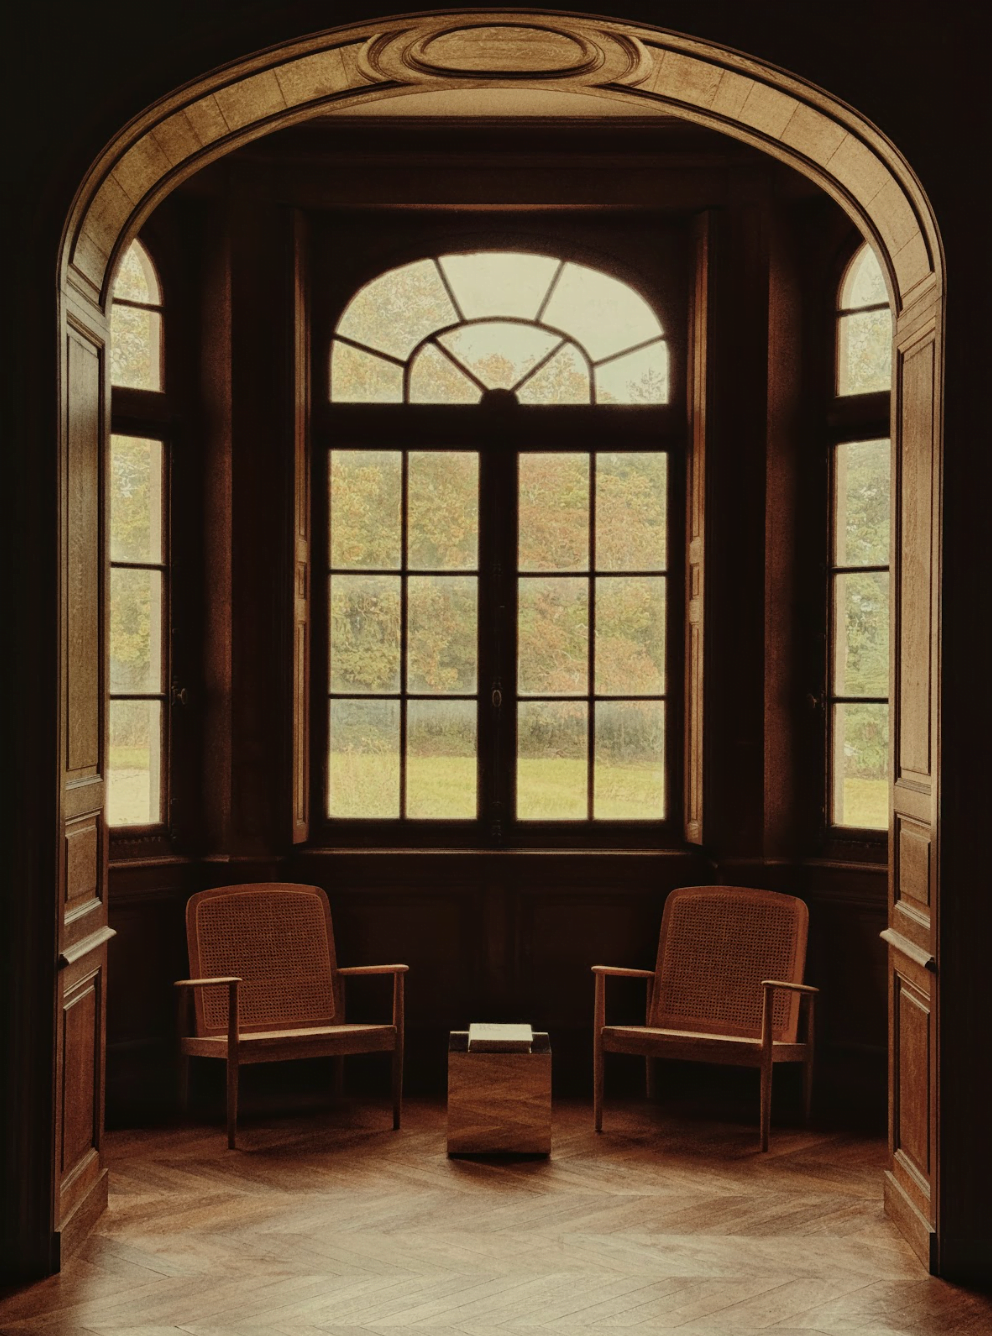 View of a cozy reading nook at Château de Thauvenay: armchairs in front of the windows